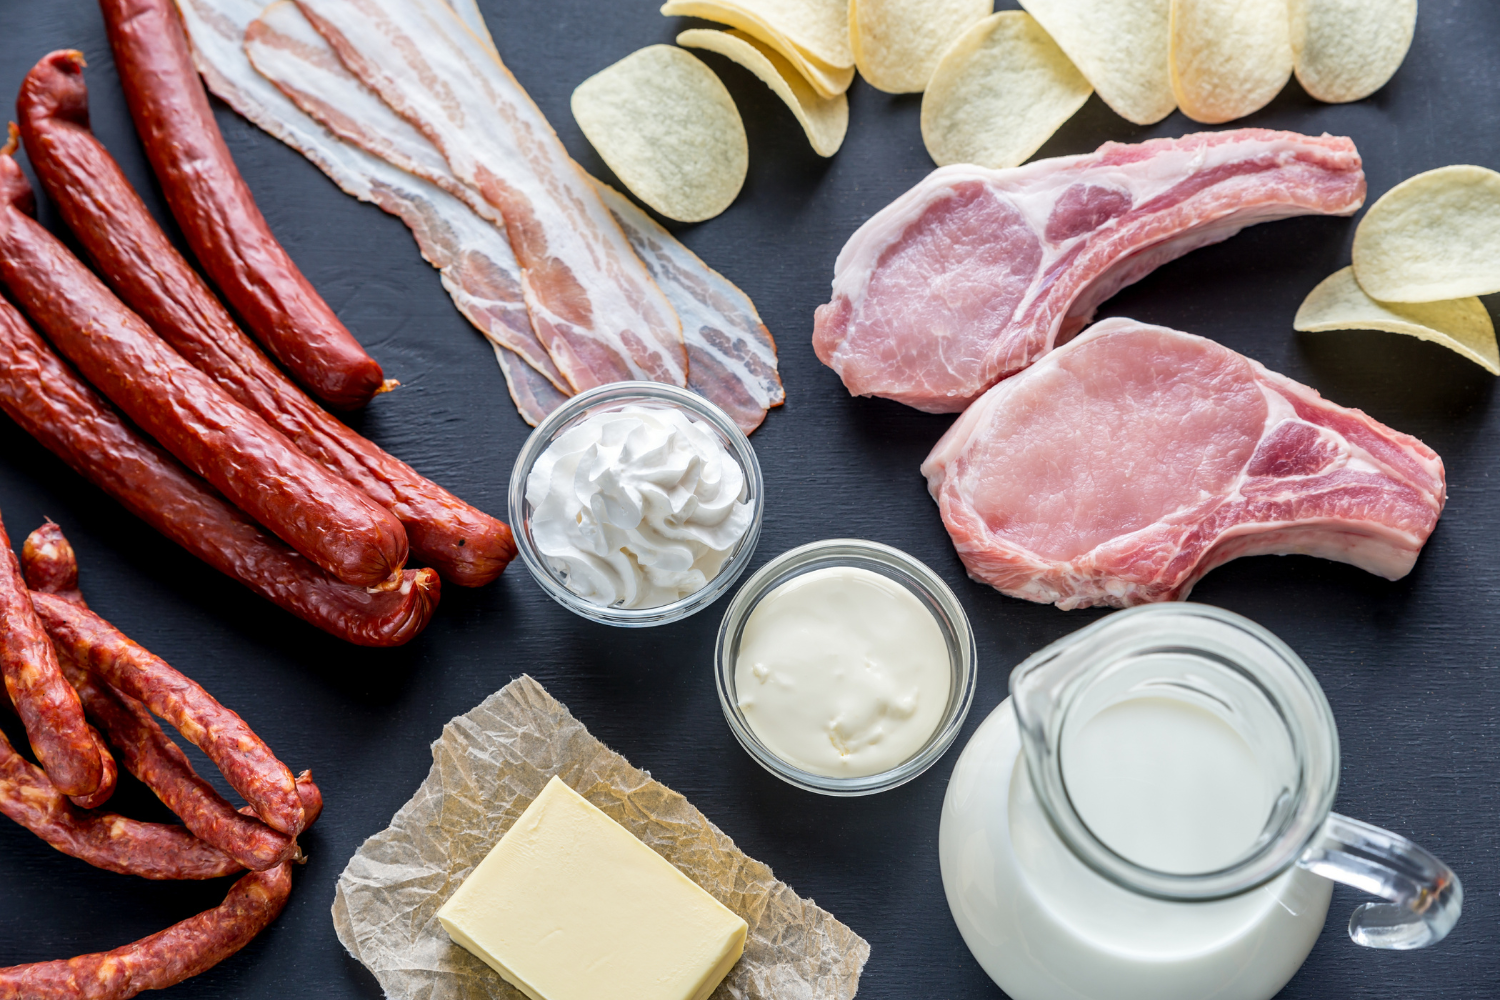 Is Saturated Fat Bad For You?